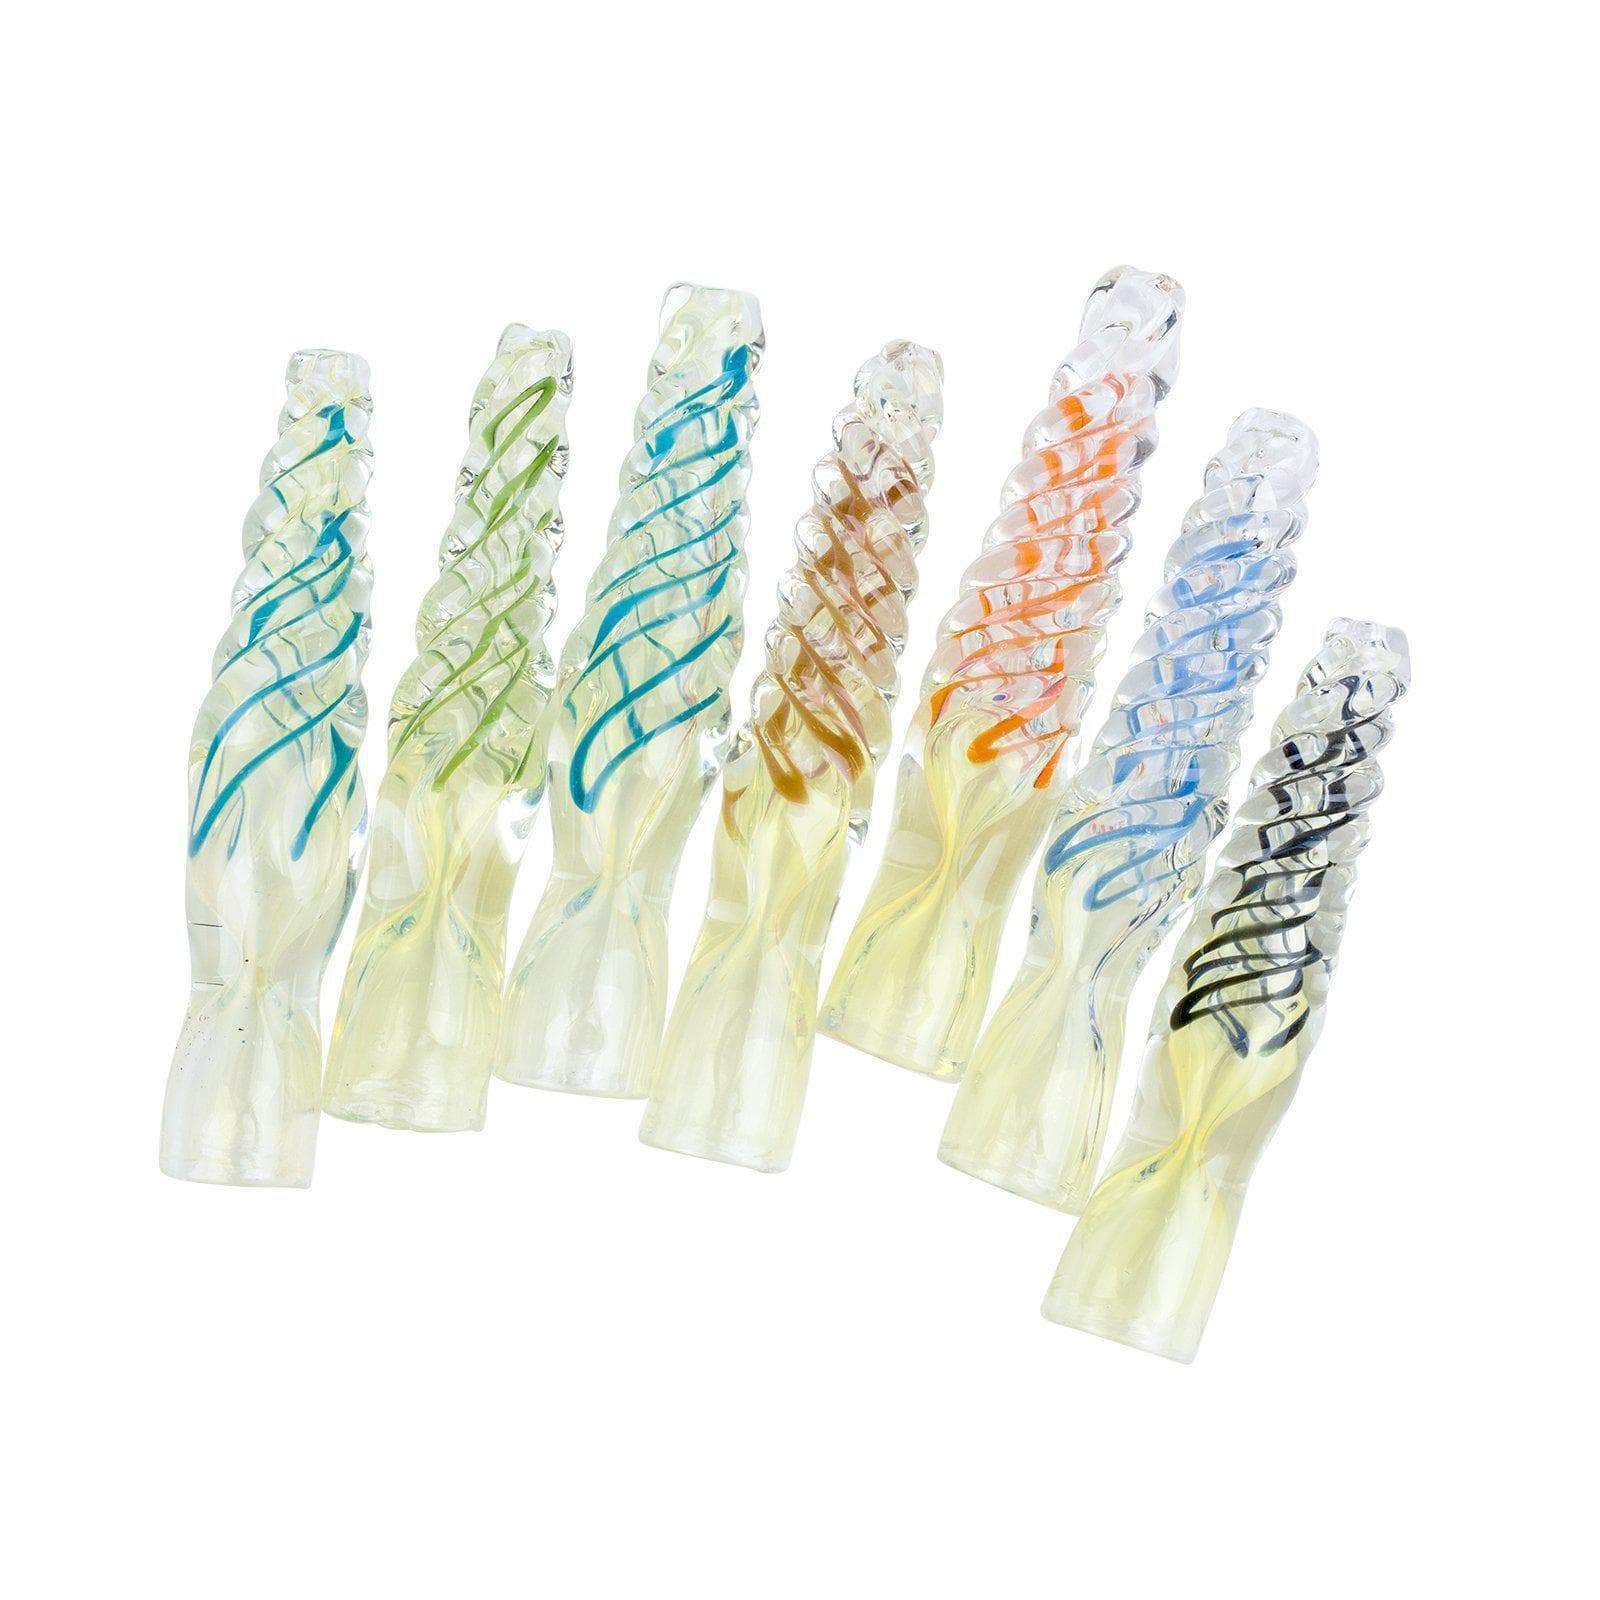 Twisting Glass Oney Pipe One Hitter R3 Wholesale 